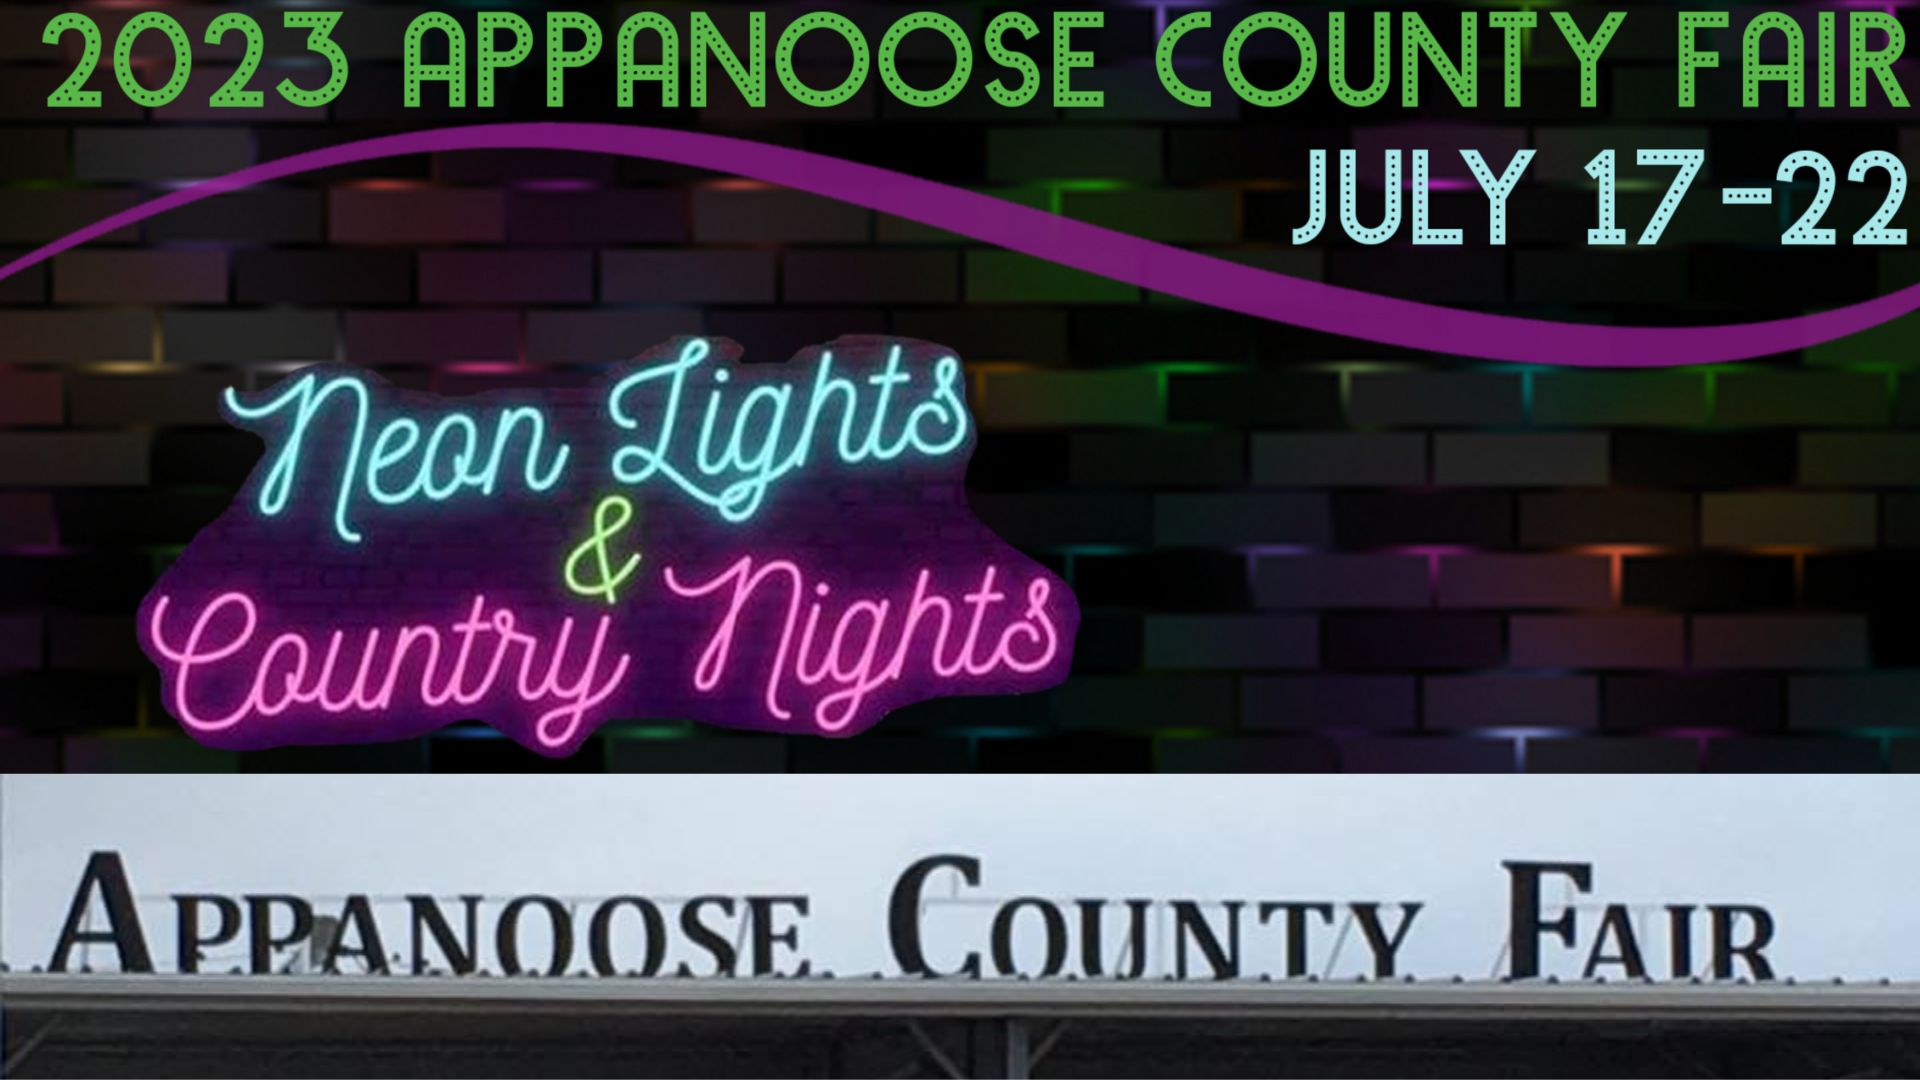 Appanoose County Fair Promotion. July 17th-22nd in Centerville Iowa